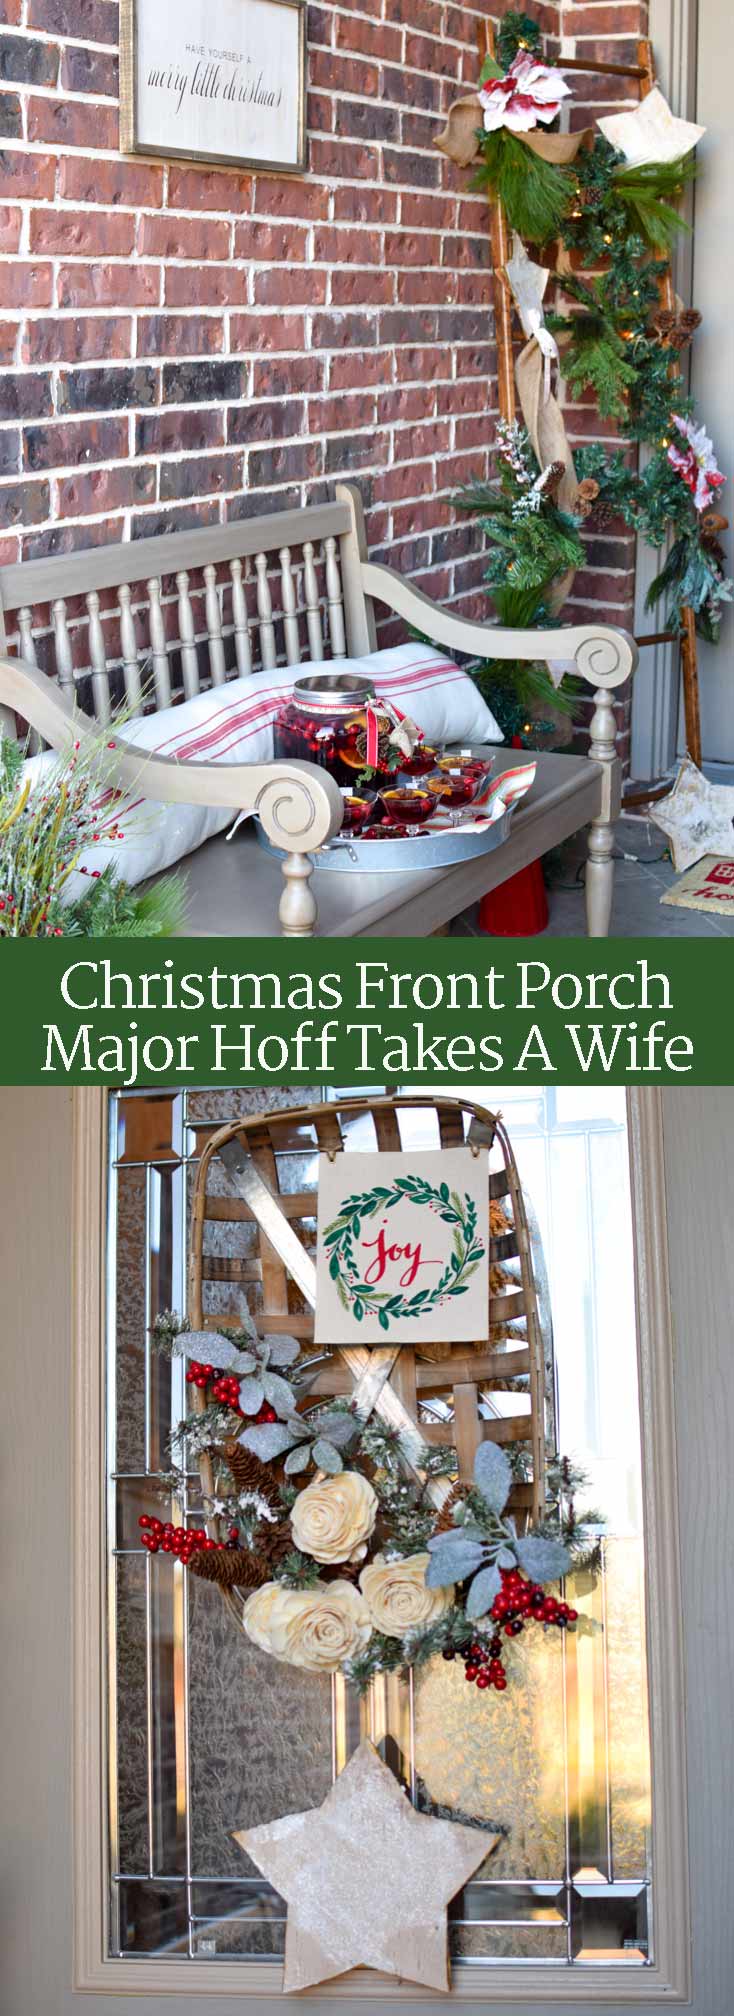 This Christmas porch is full of holiday cheer! Enjoy the farmhouse style decor and grab lots of ideas for a simple Christmas wreath, a ladder with lights and garland, a bench with an inviting drink, and lots of other DIY decorations. Be sure to check out all the details! #Christmas #Christmasdecor #Christmascrafts via @mrsmajorhoff